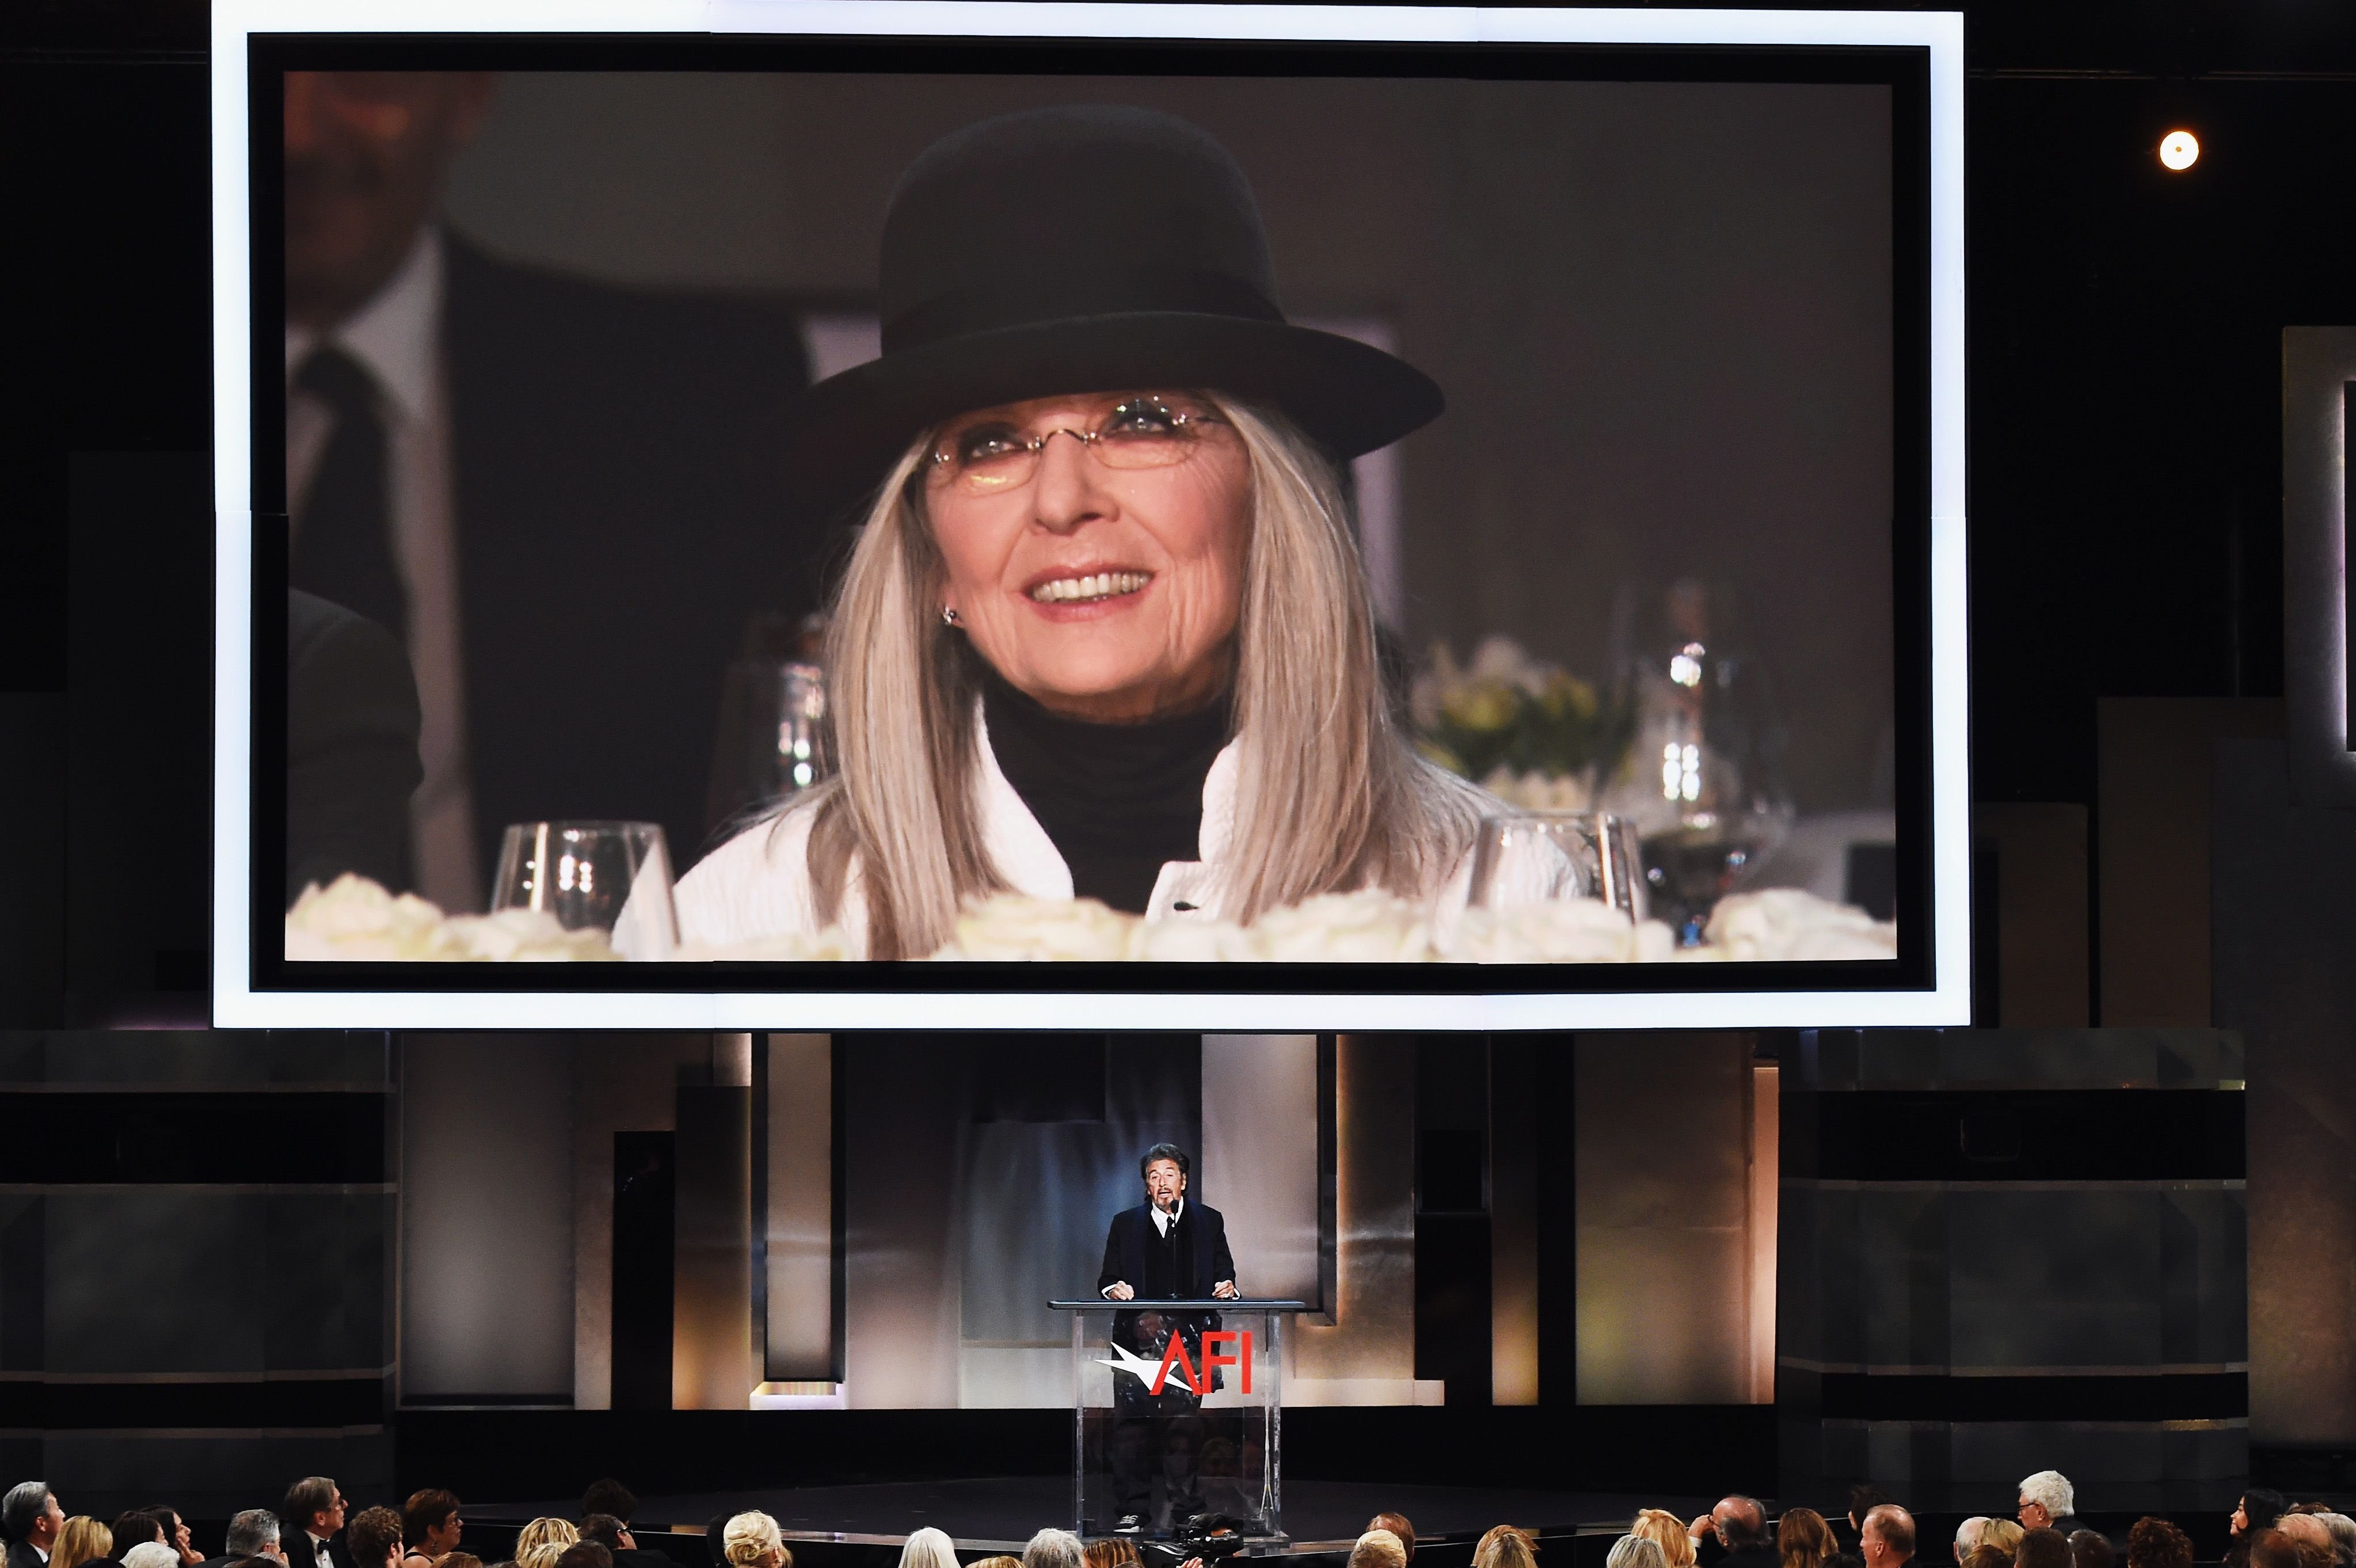 Diane Keaton projected on a video screen while Al Pacino speaks onstage during the American Film Institute's 45th Life Achievement Award Gala on June 8, 2017, in Hollywood, California. | Source: Kevin Winter/Getty Images